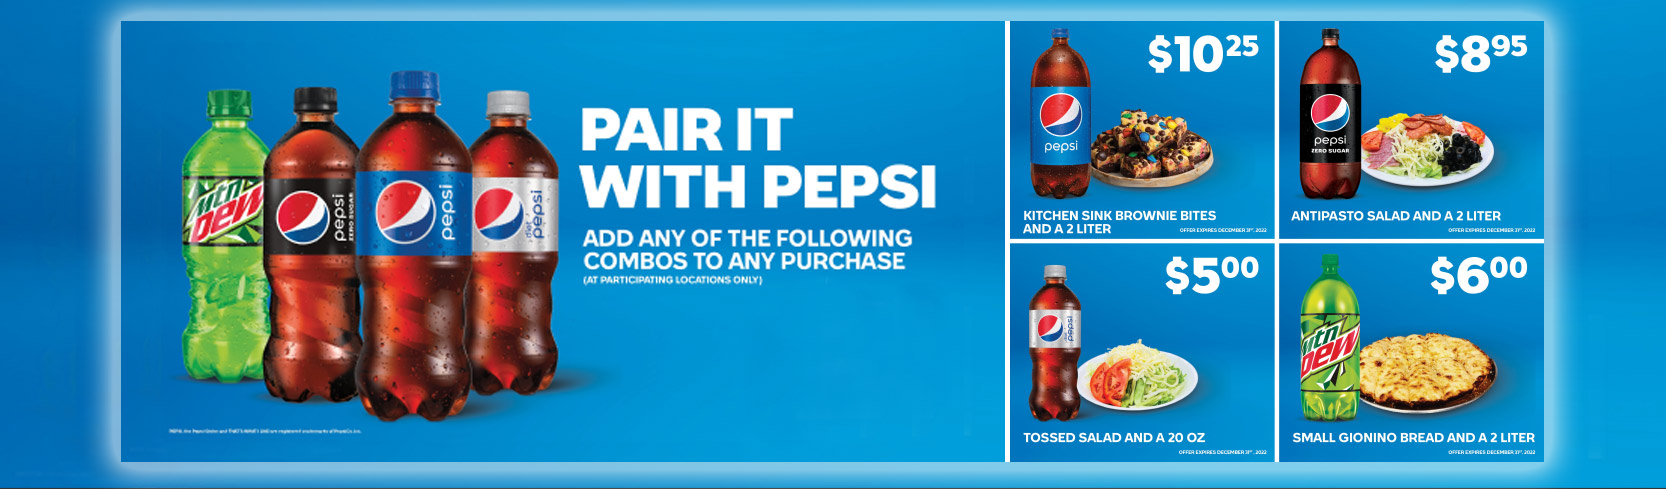 Pair it with Pepsi Promotion